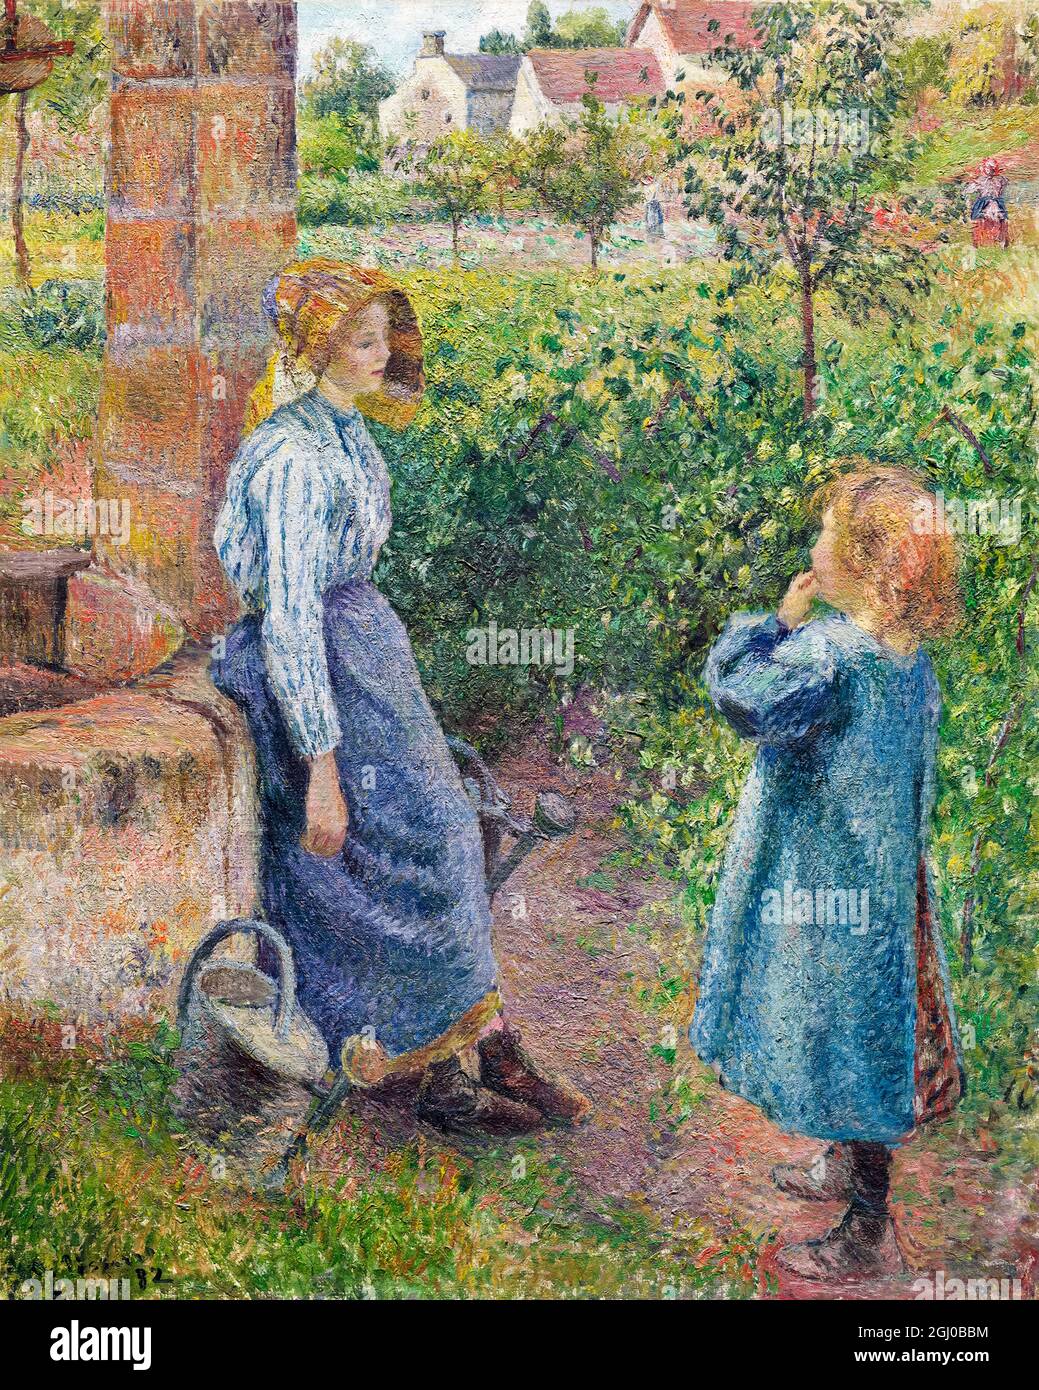 Camille Pissarro, Woman and Child at the Well, painting, 1882 Stock Photo